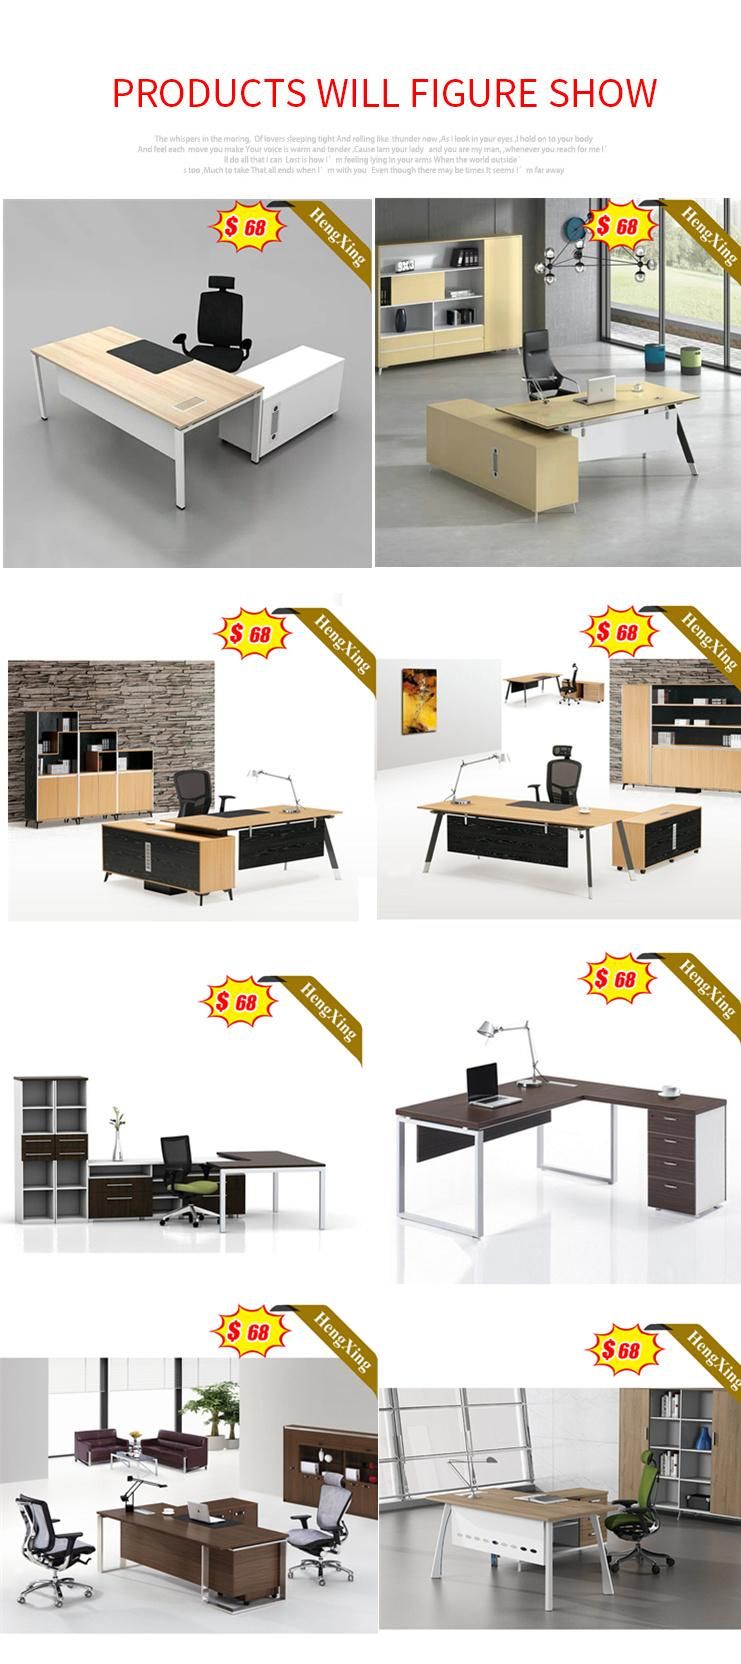 Wholesale Wooden Factory Low Price OEM Oak and White Computer Table Furniture Office Desk